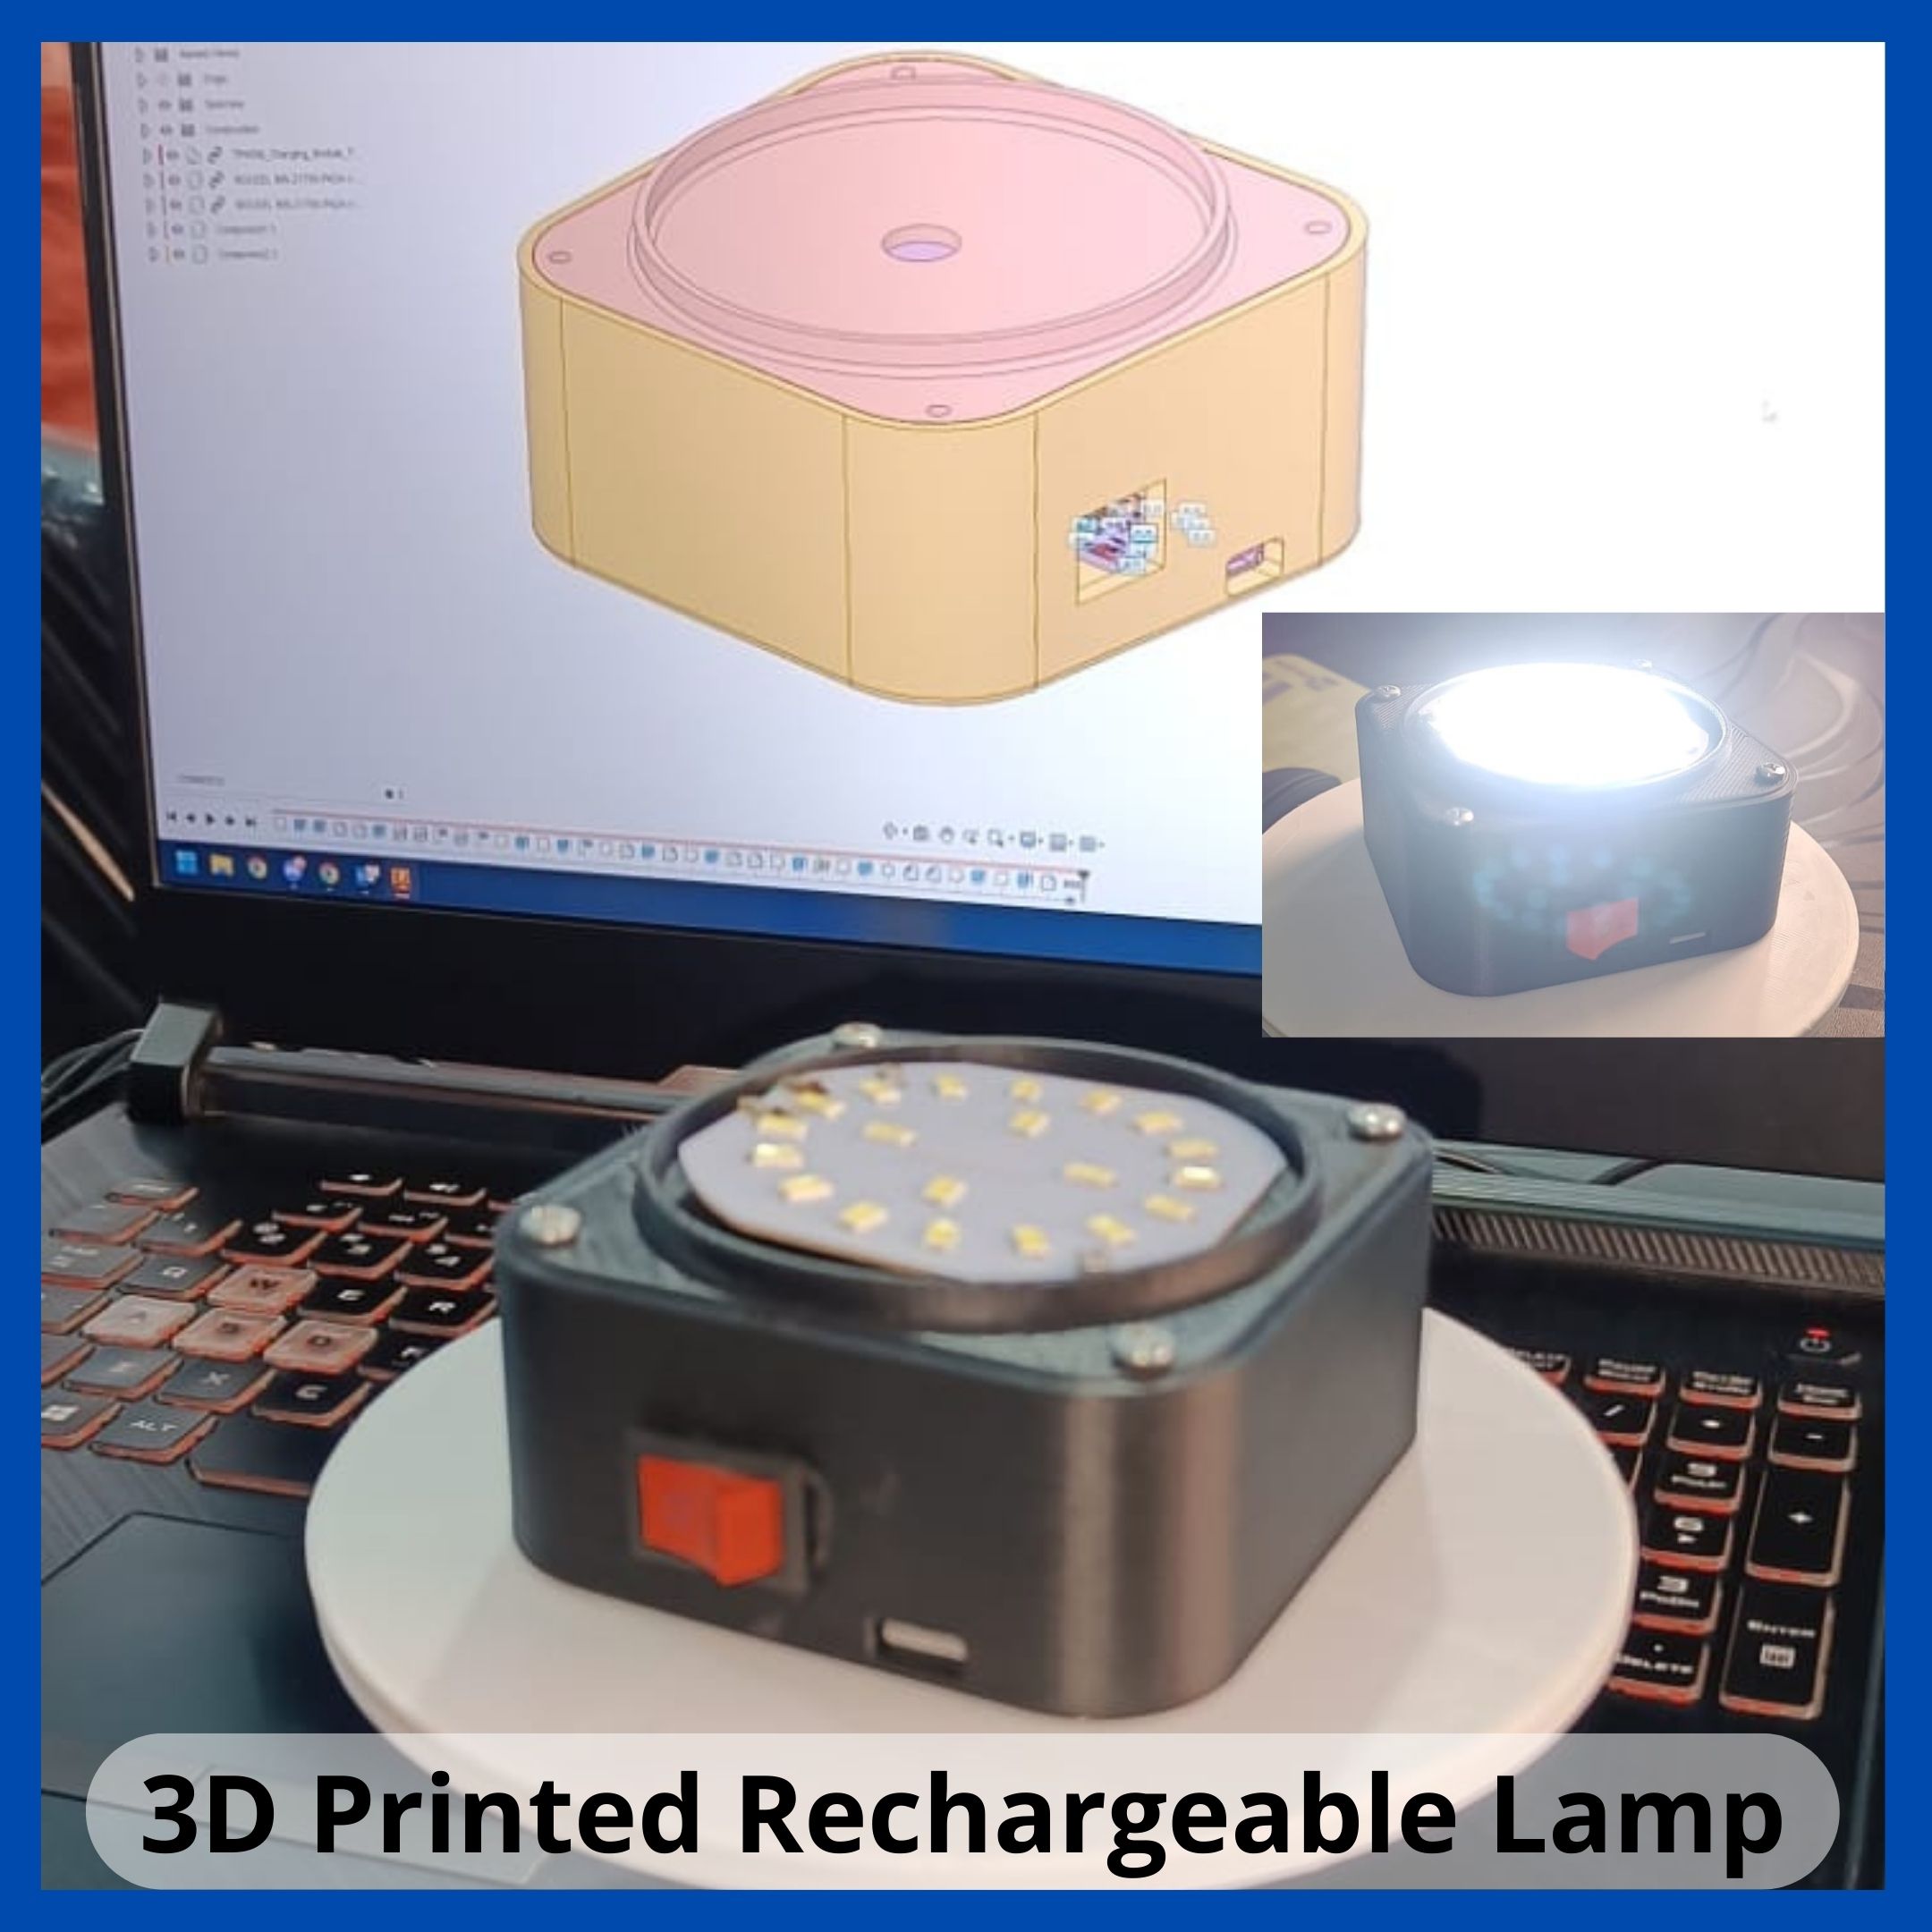 3D Printed Rechargeable Lamp